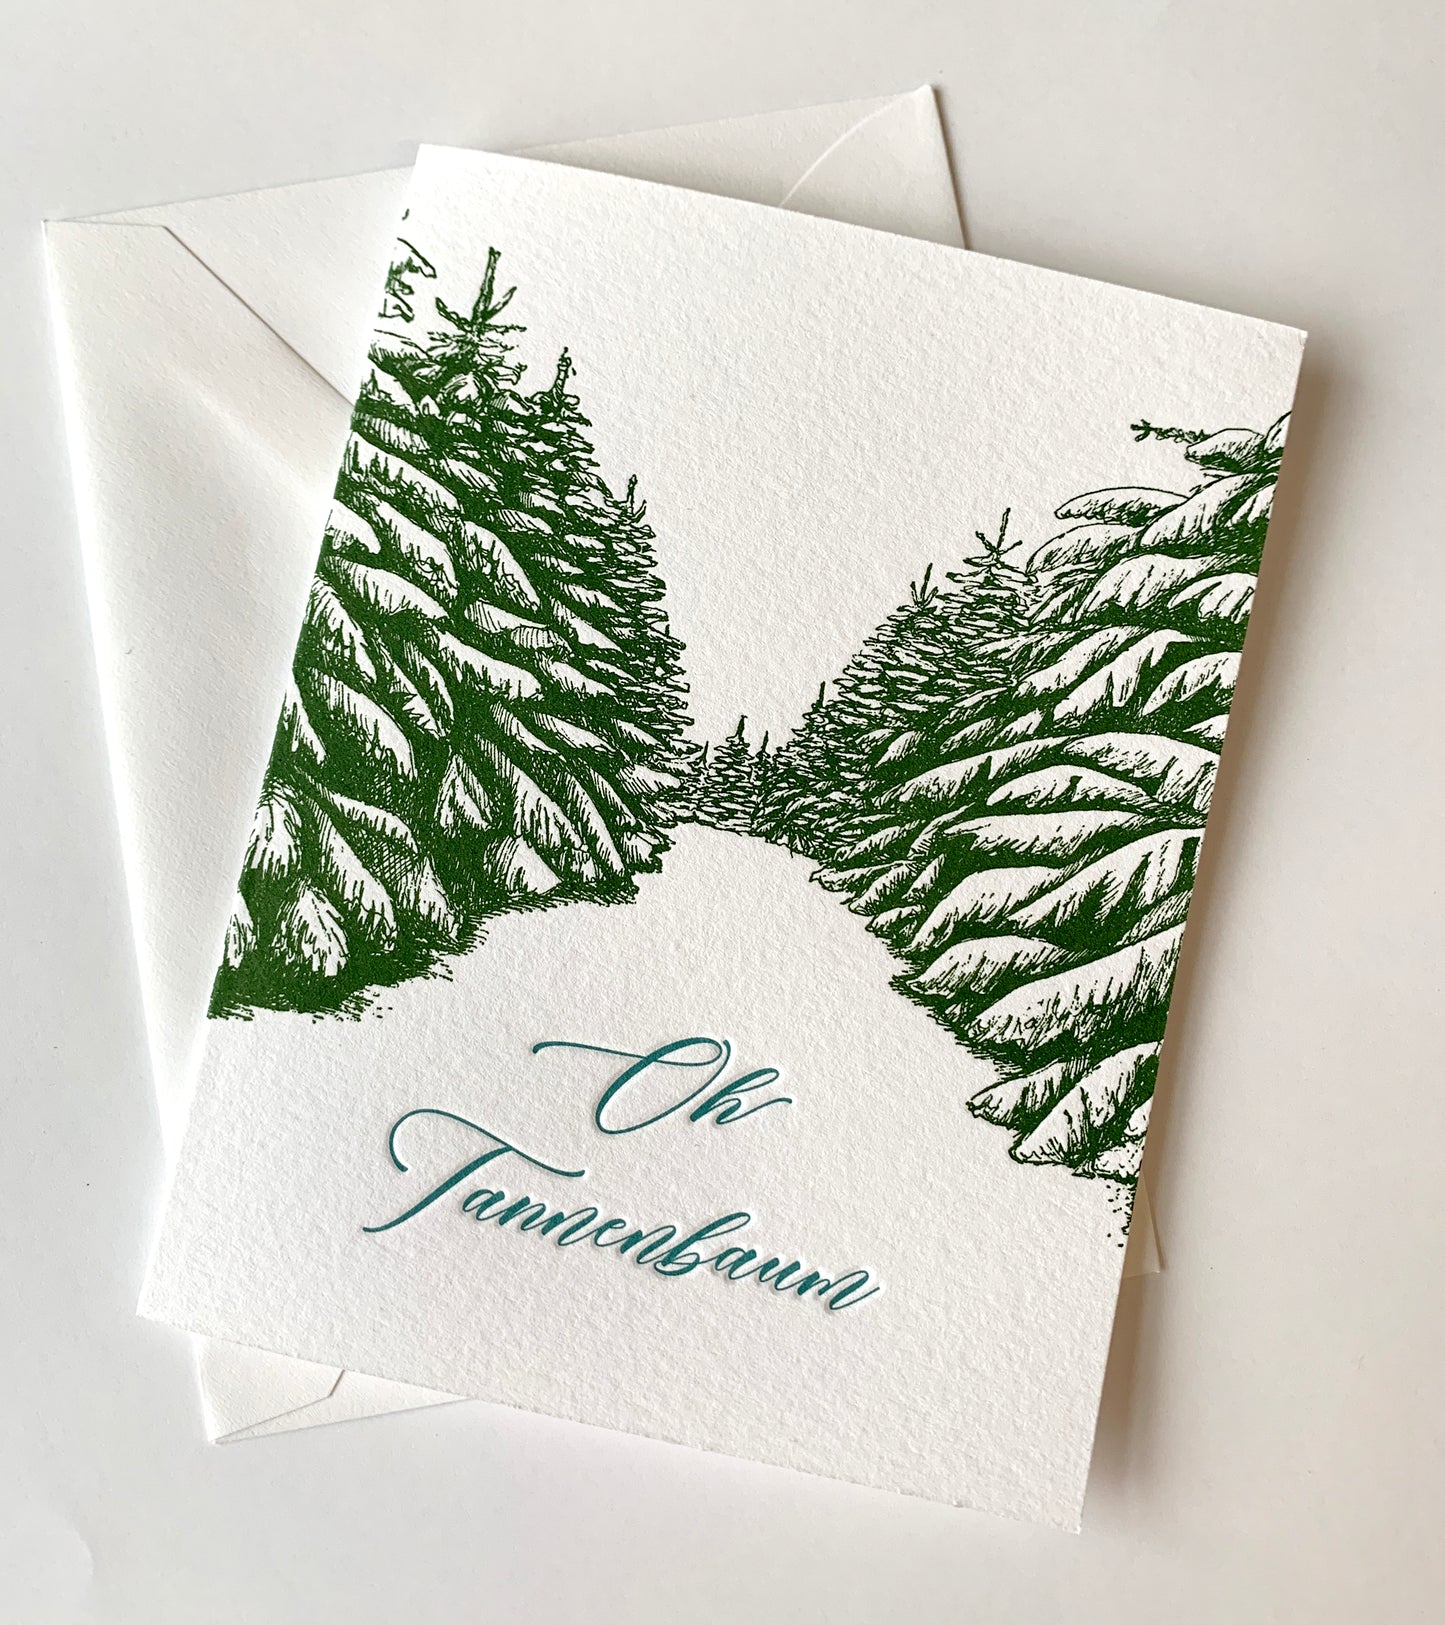 Letterpress holiday card with trees that says "Oh tannenbaum" by Rust Belt Love